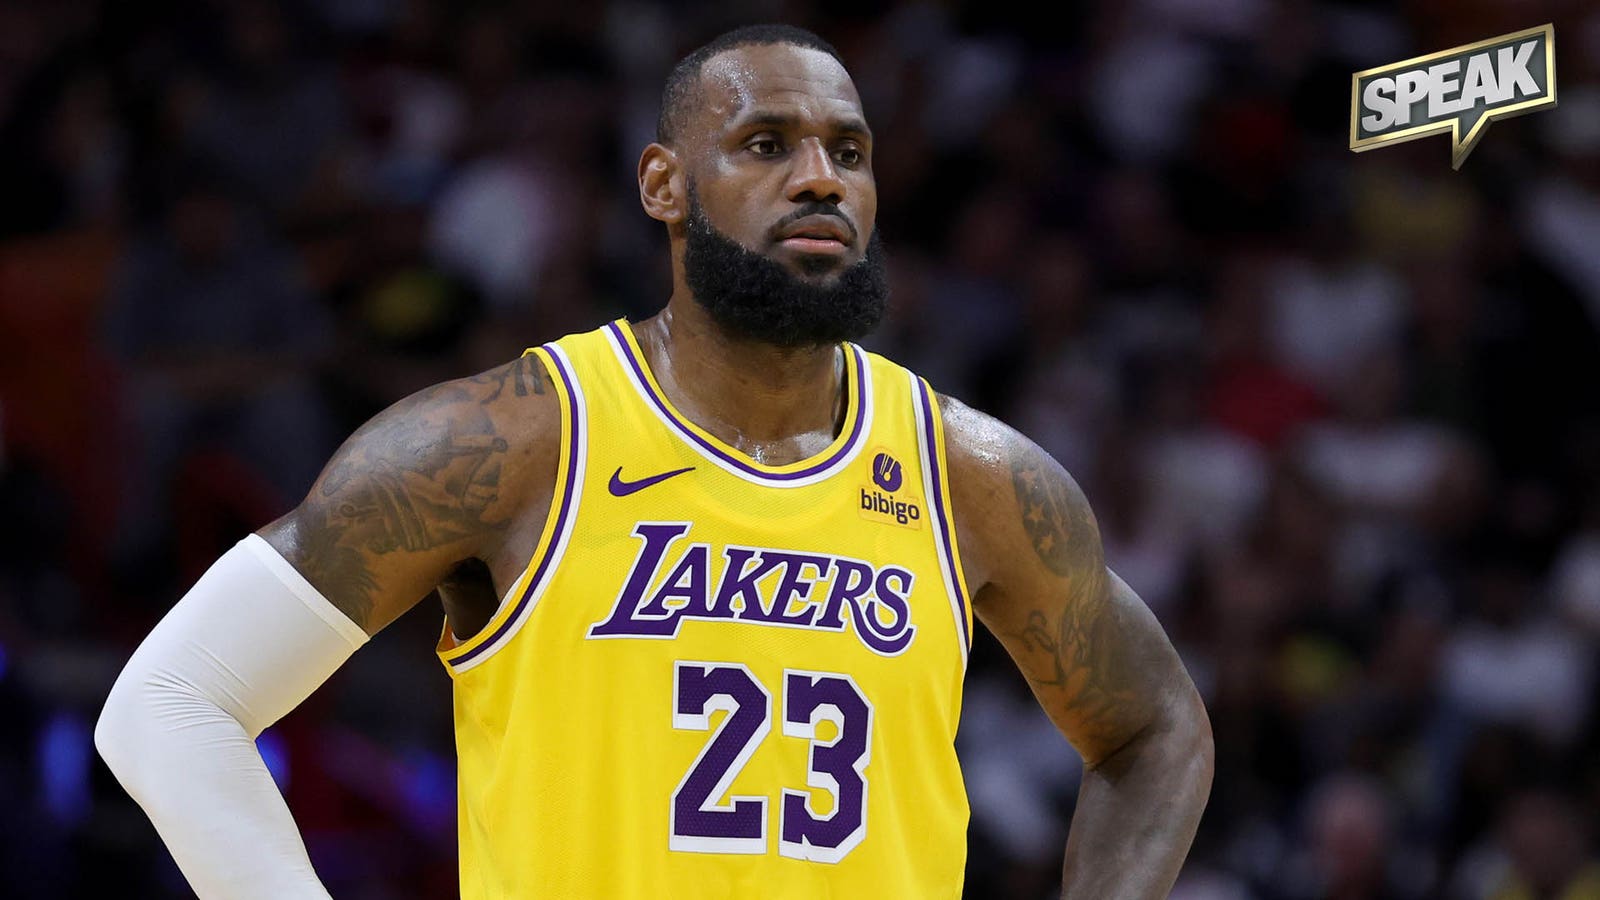 How concerning is 3-5 start for LeBron and Lakers? | Speak